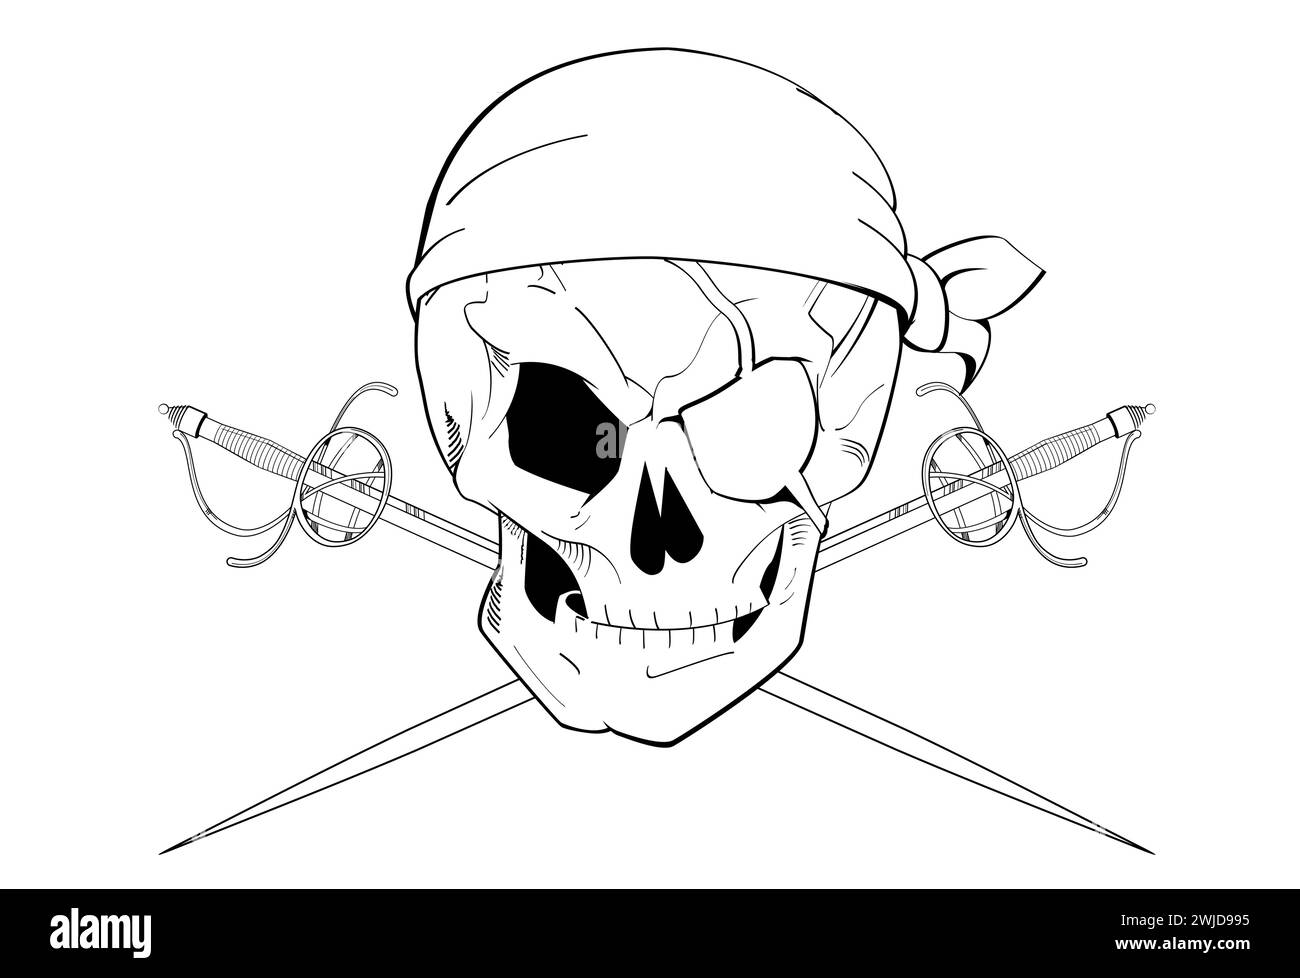 Pirate skull t-shirt design with an eye patch and two crossed swords. Monochrome illustration for tattoos. Stock Vector